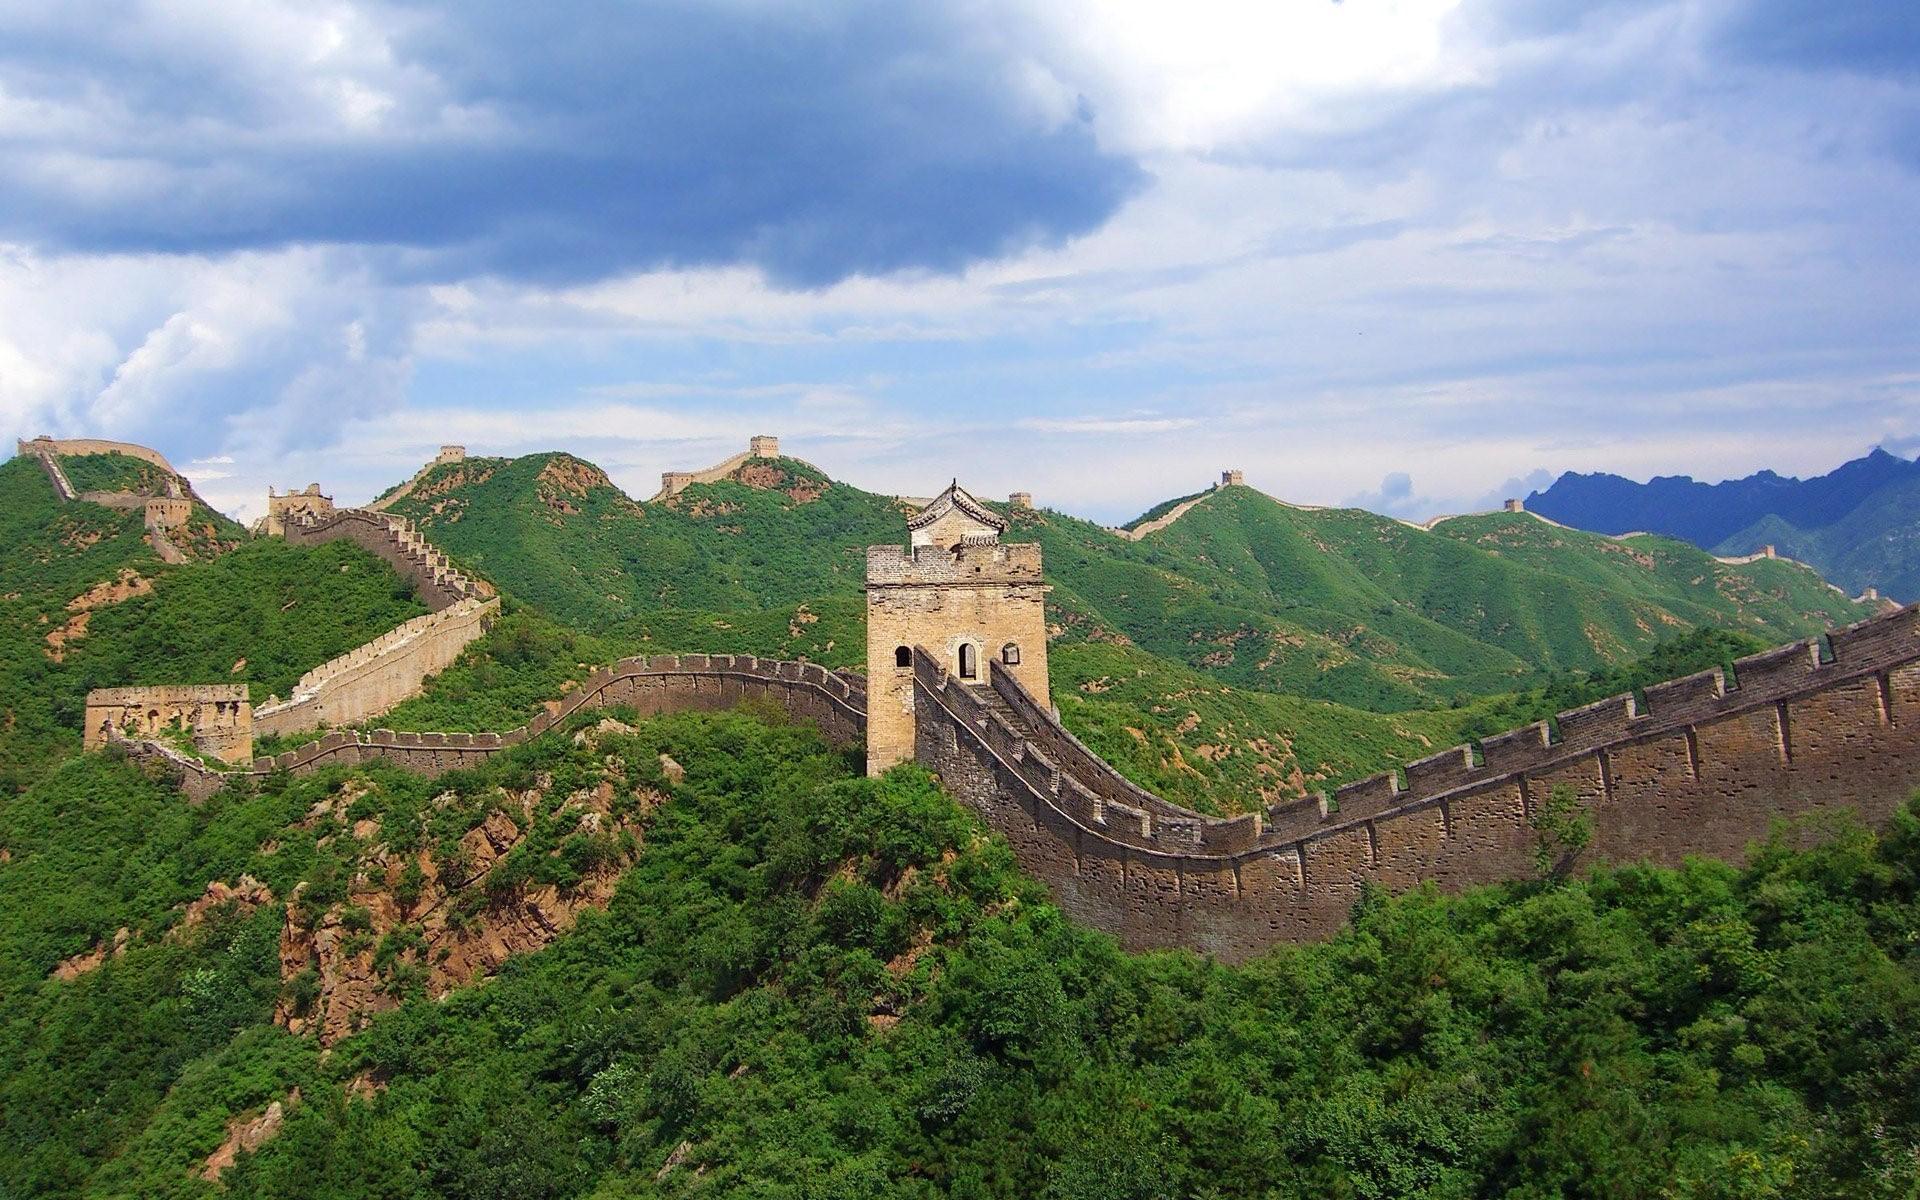 Wallpapers of The Great Wall of China